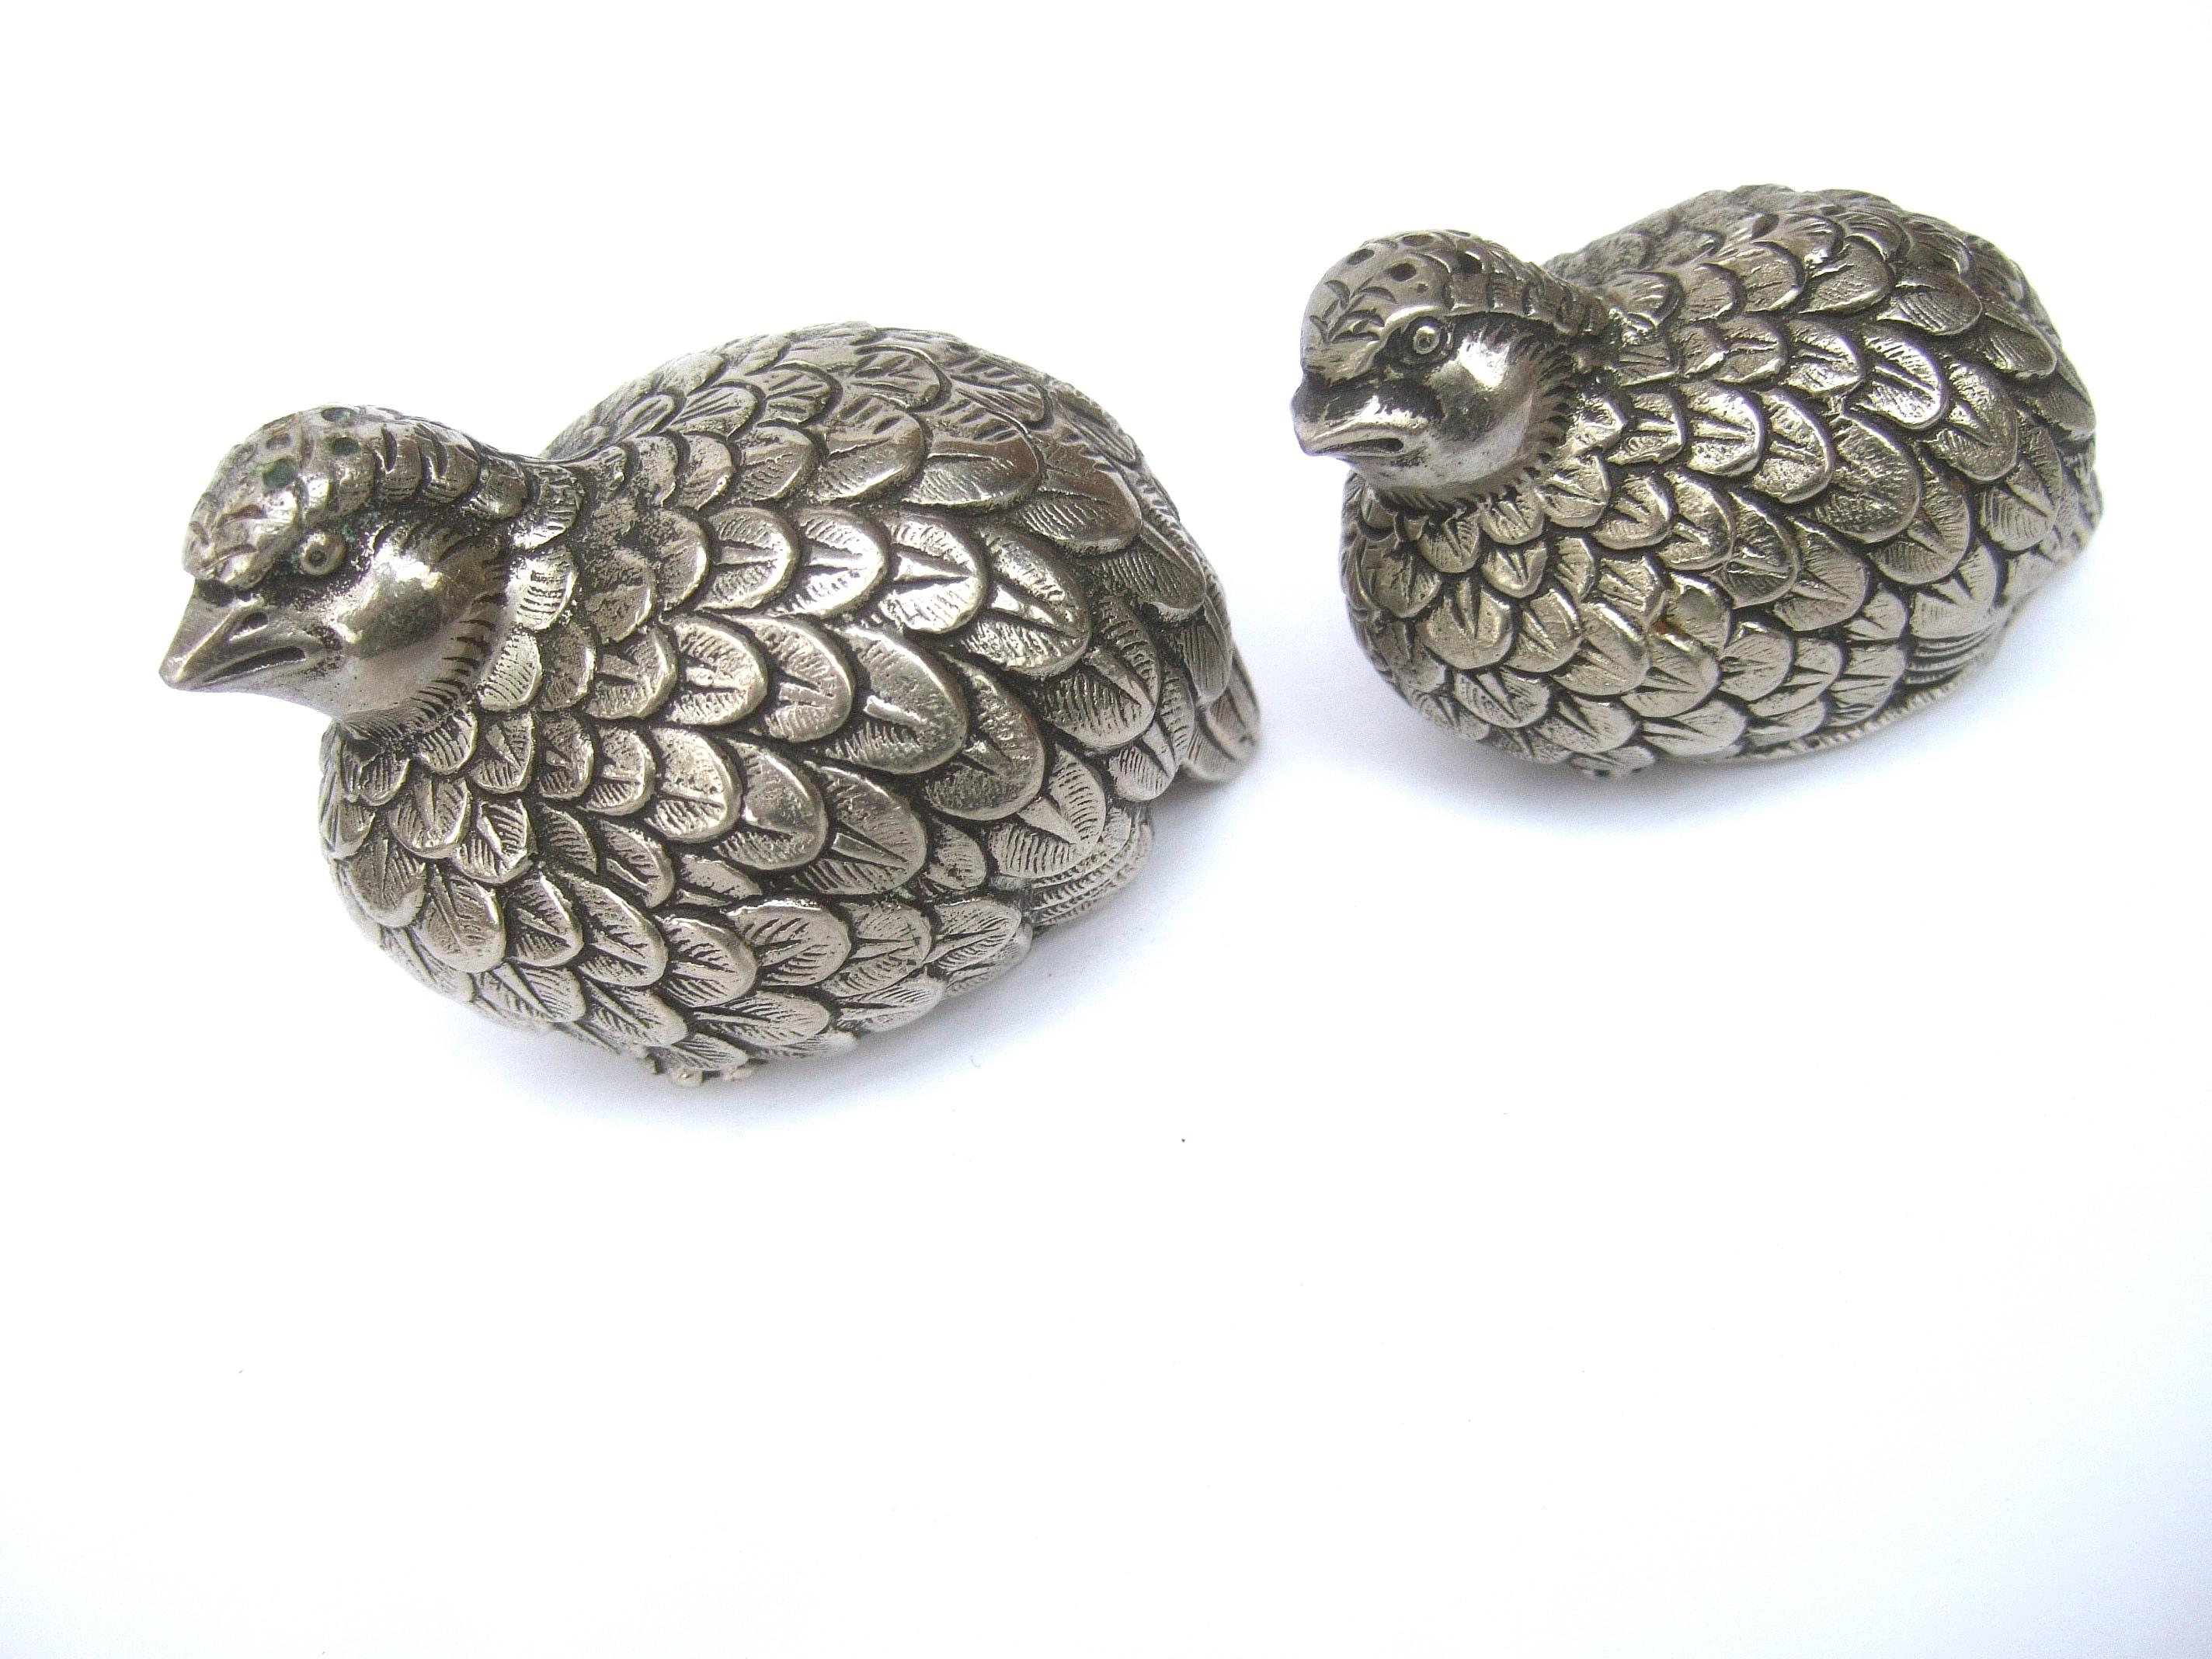 Gucci Italy Rare silver metal quail salt & pepper shakers c 1970s
The elegant quail figures are designed with silver plated textured
metal with intricate detail that emulates their plumage  

The pair of quail figures make elegant fine dining decor